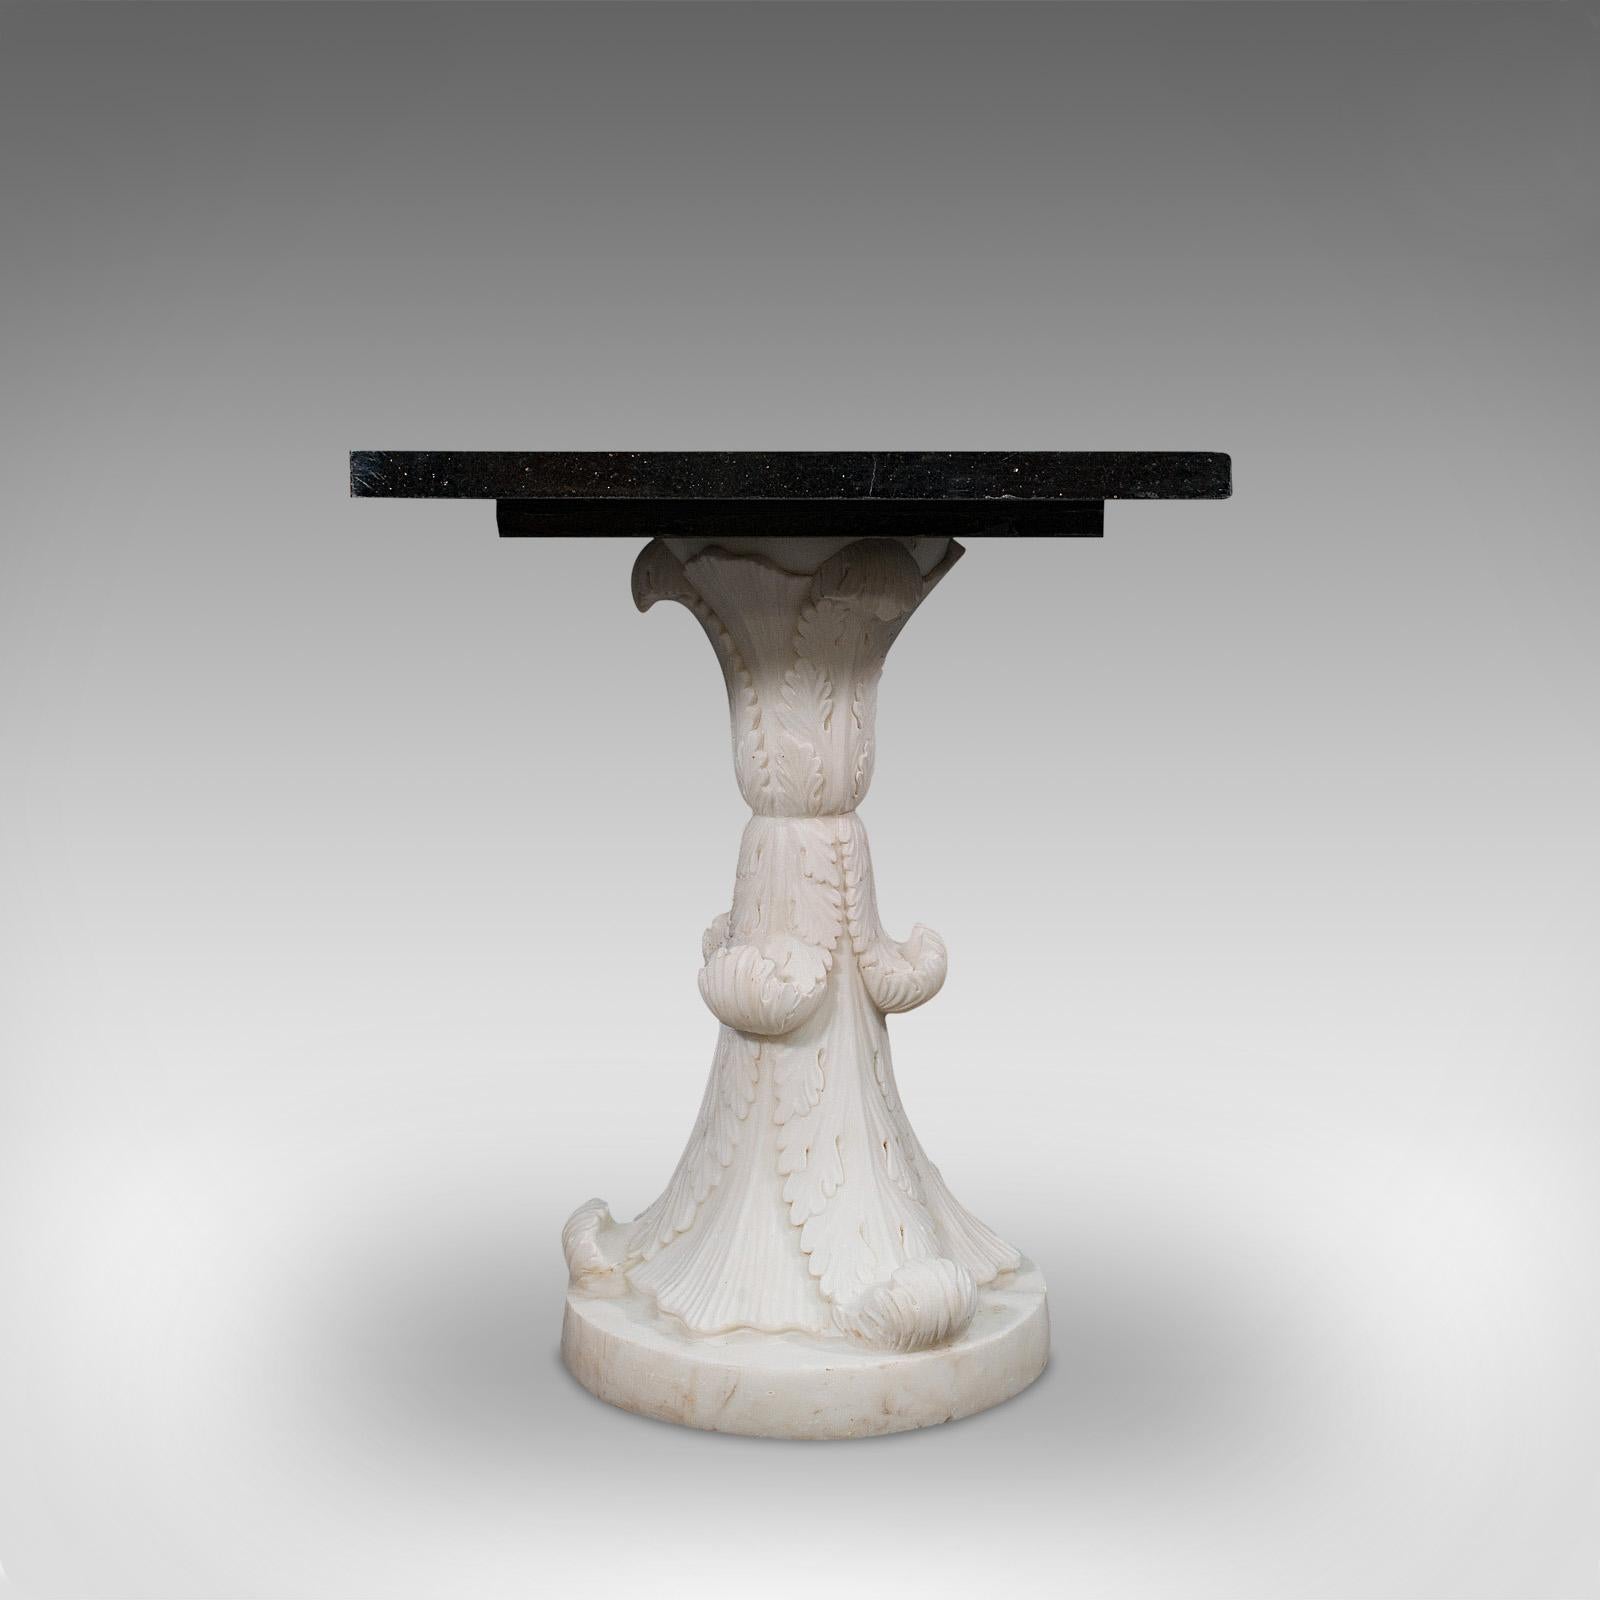 'Cornucopia' is a striking vintage decorative marble table. An English, handmade pietra dura by renowned sculptural artist Dominic Hurley.

An abundance of wonderful marbles decorate the composition
Displaying a desirable aged patina and in very